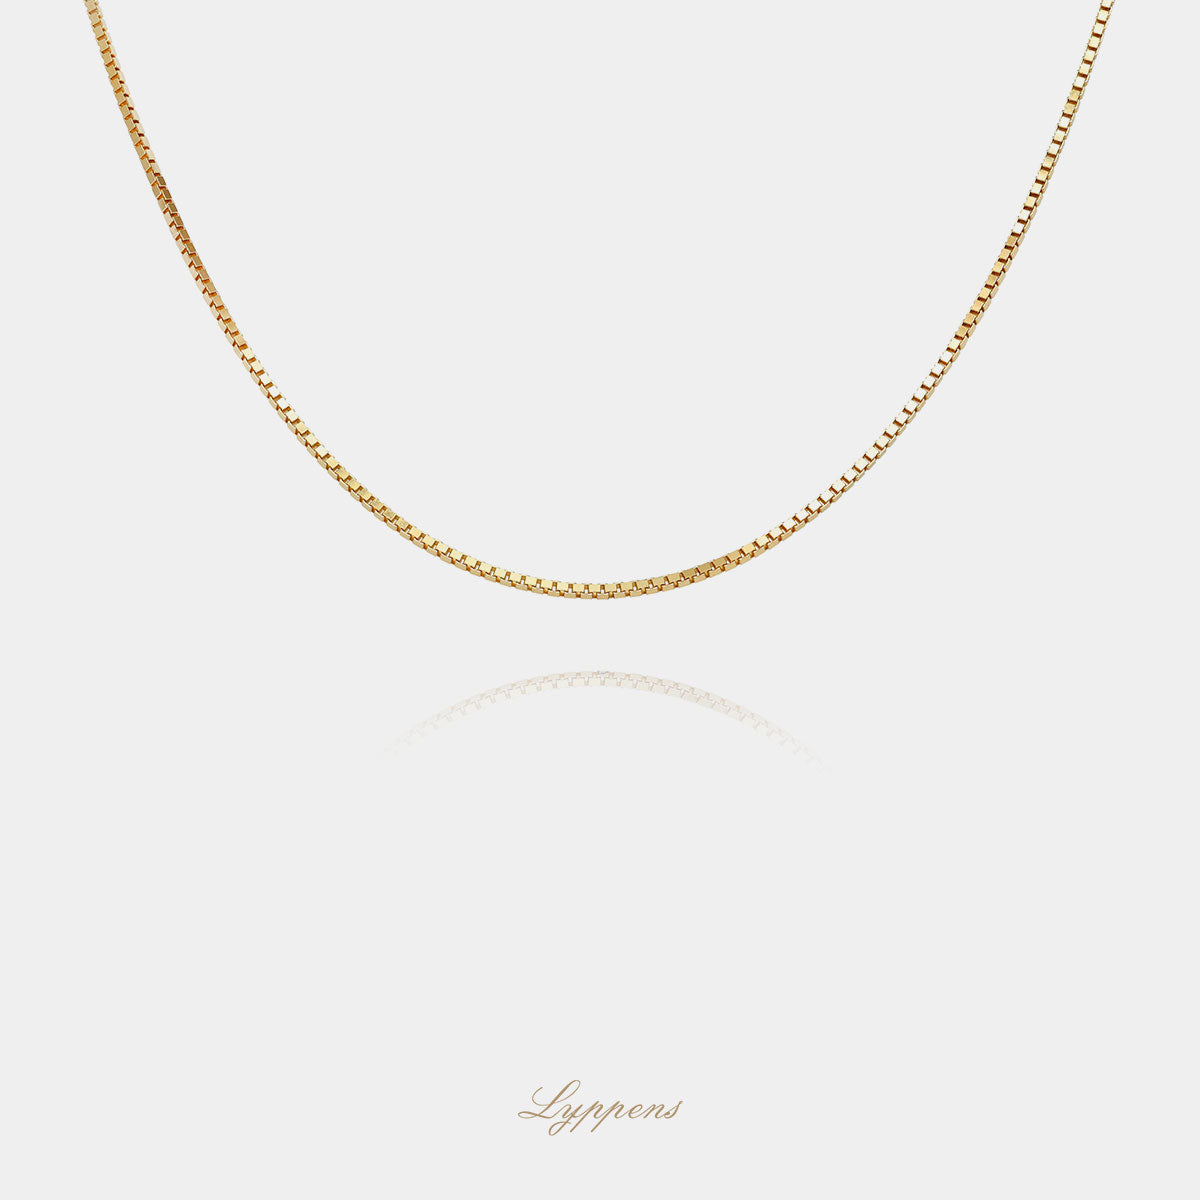 Yellow gold venetian link necklace